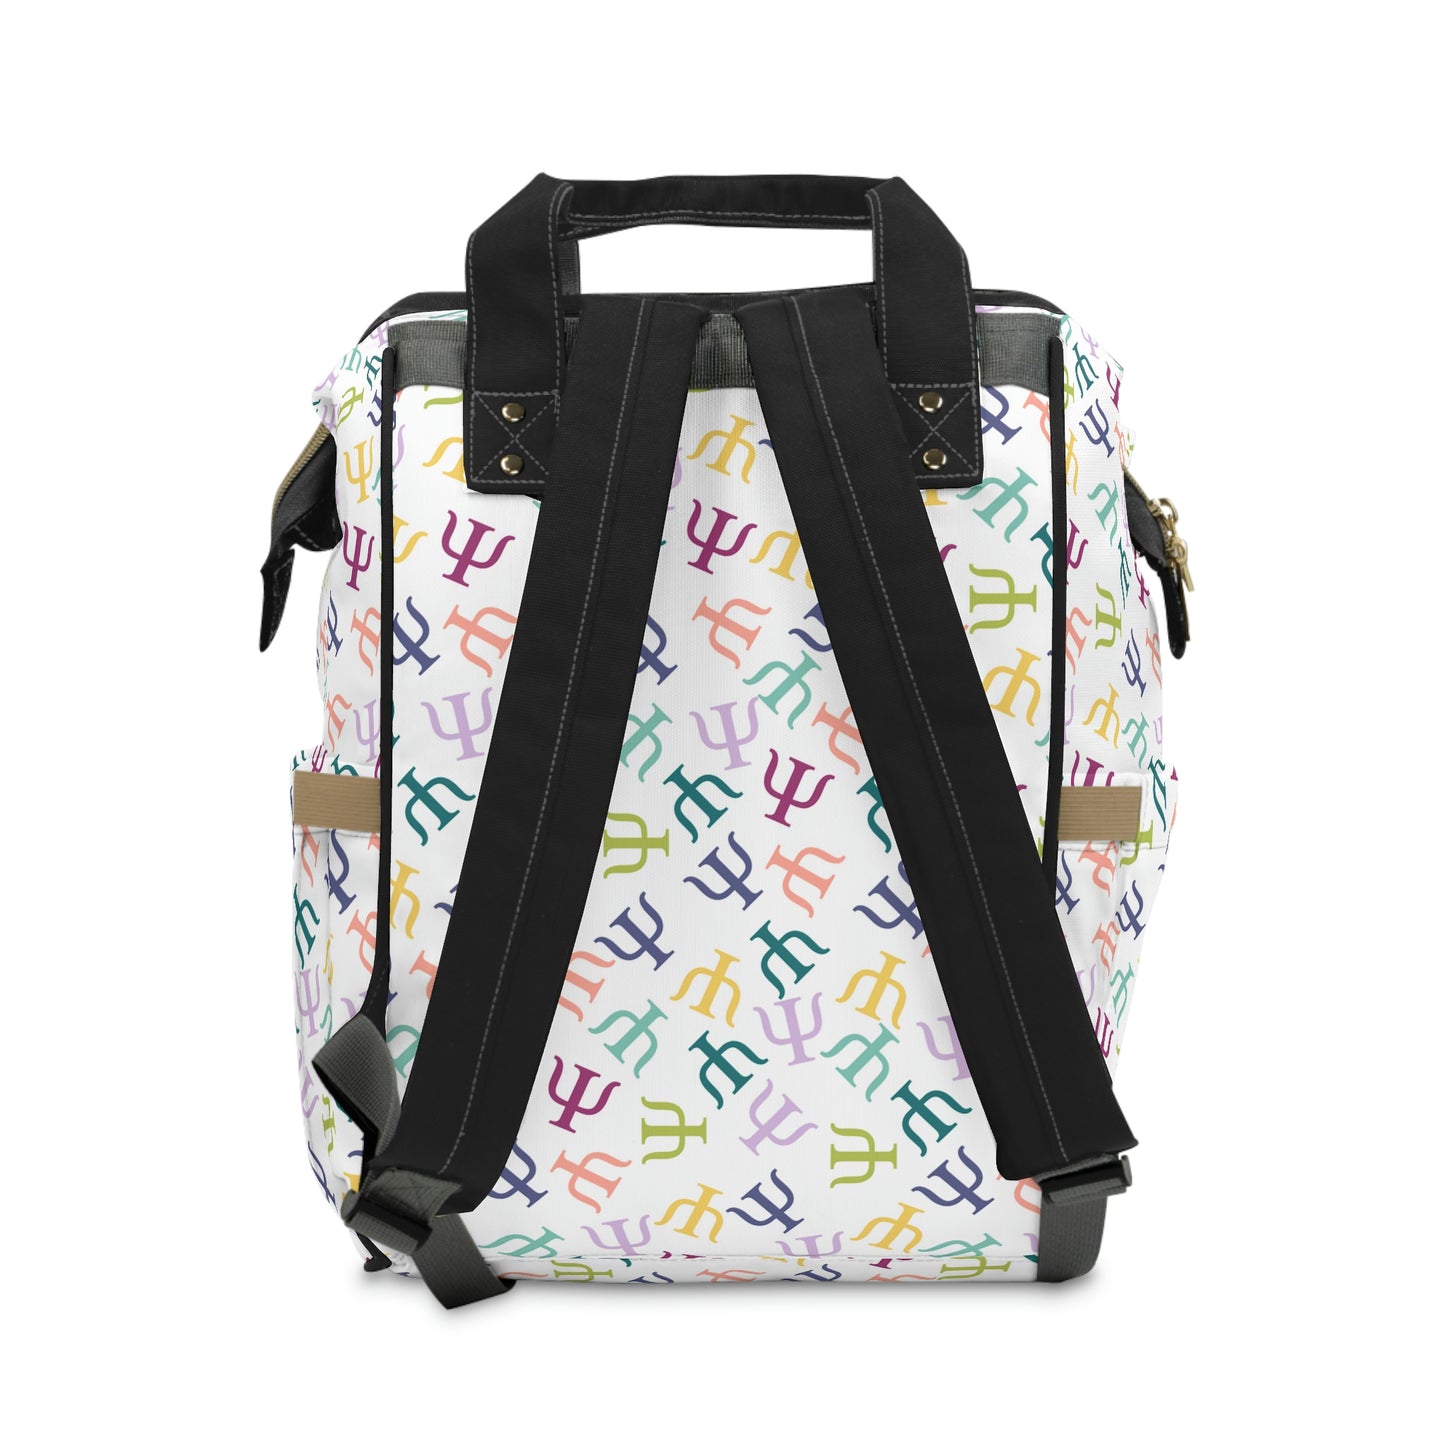 Muted Rainbow Psych Symbol Backpack